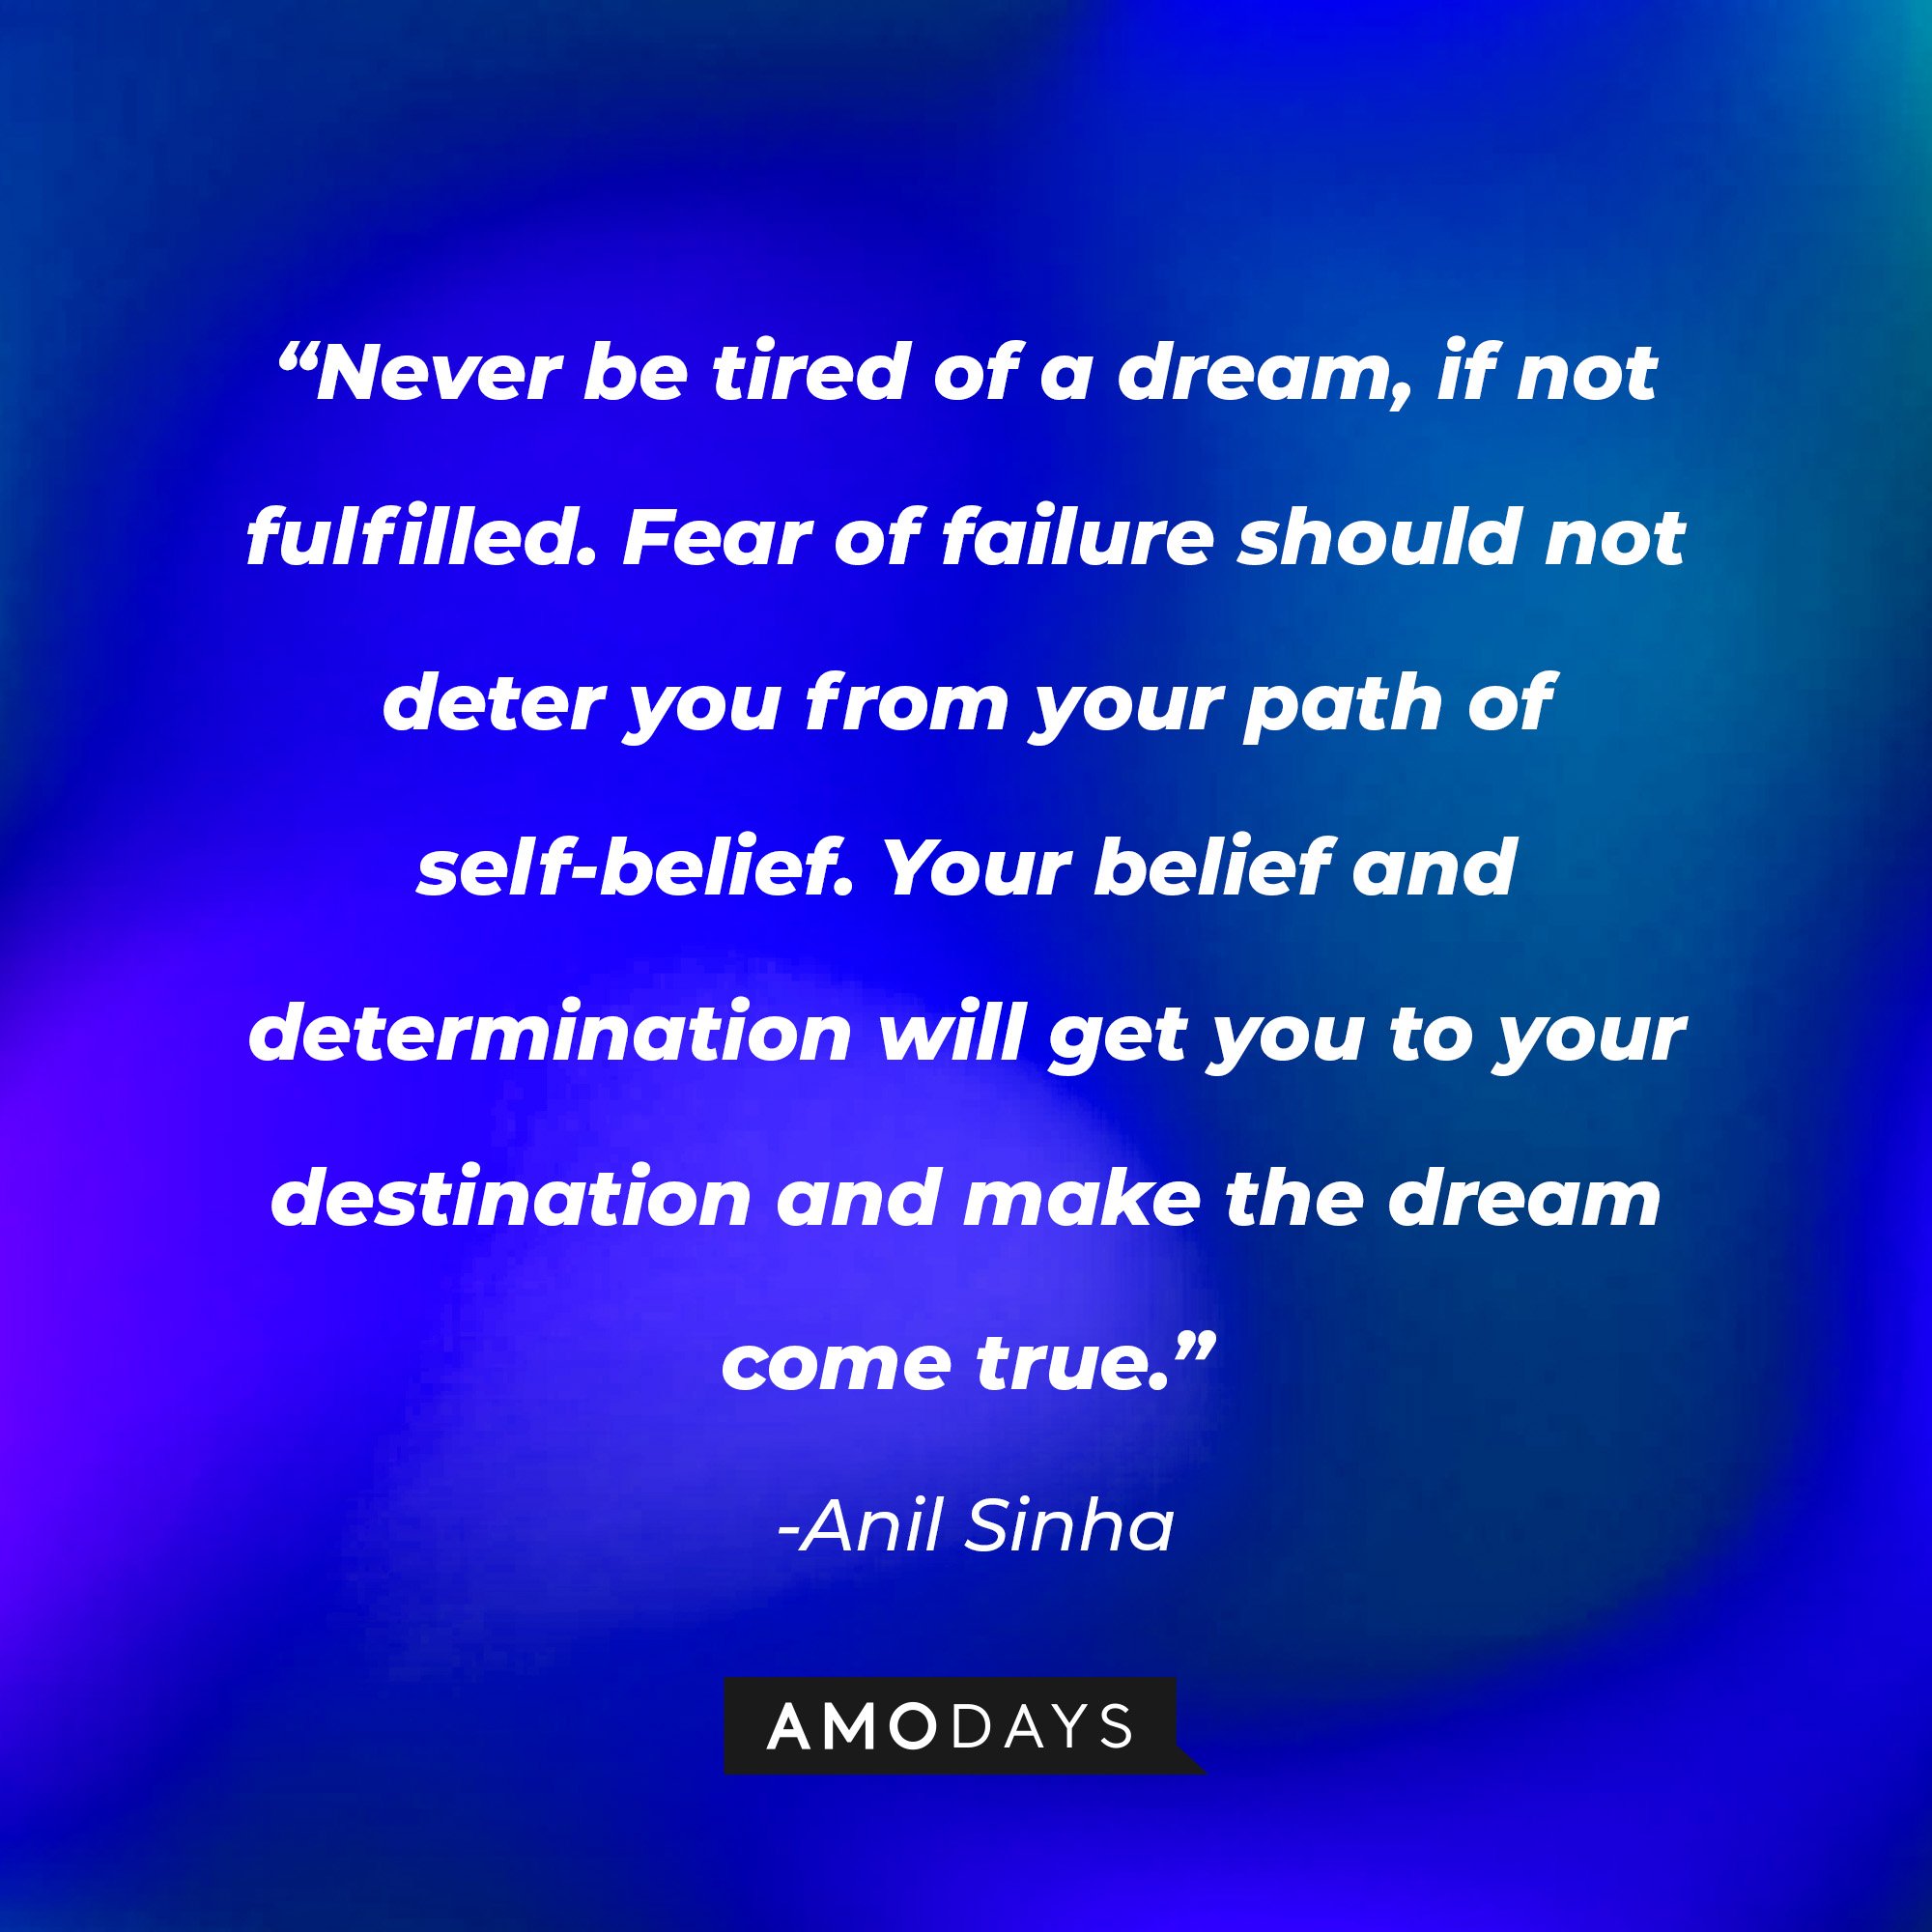  Anil Sinha's quote: “Never be tired of a dream, if not fulfilled. Fear of failure should not deter you from your path of self-belief. Your belief and determination will get you to your destination and make the dream come true.” | Image: AmoDays